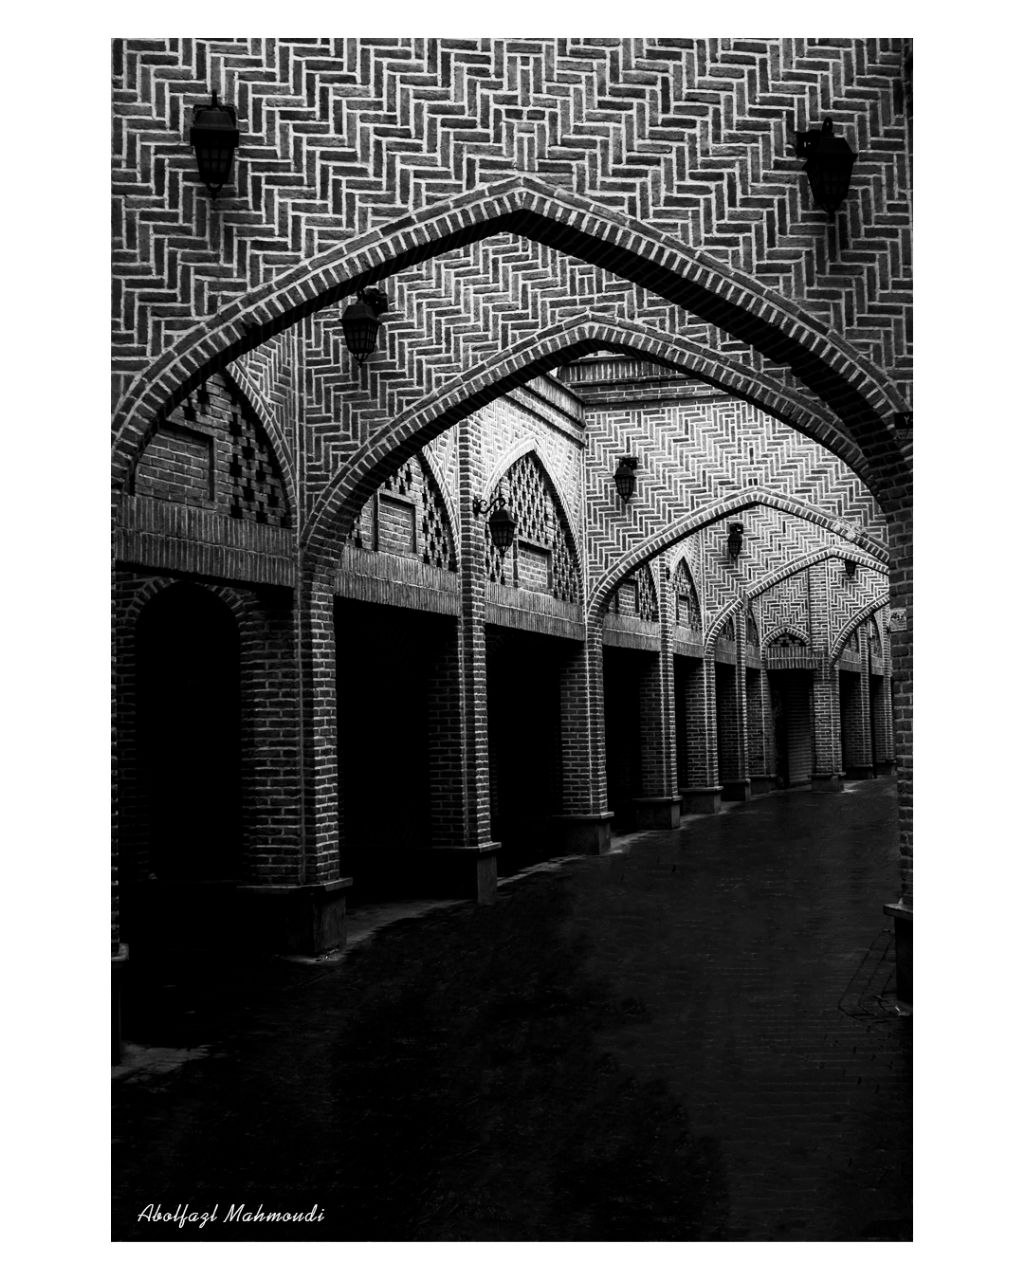 a black and white photo of a building with arched windows